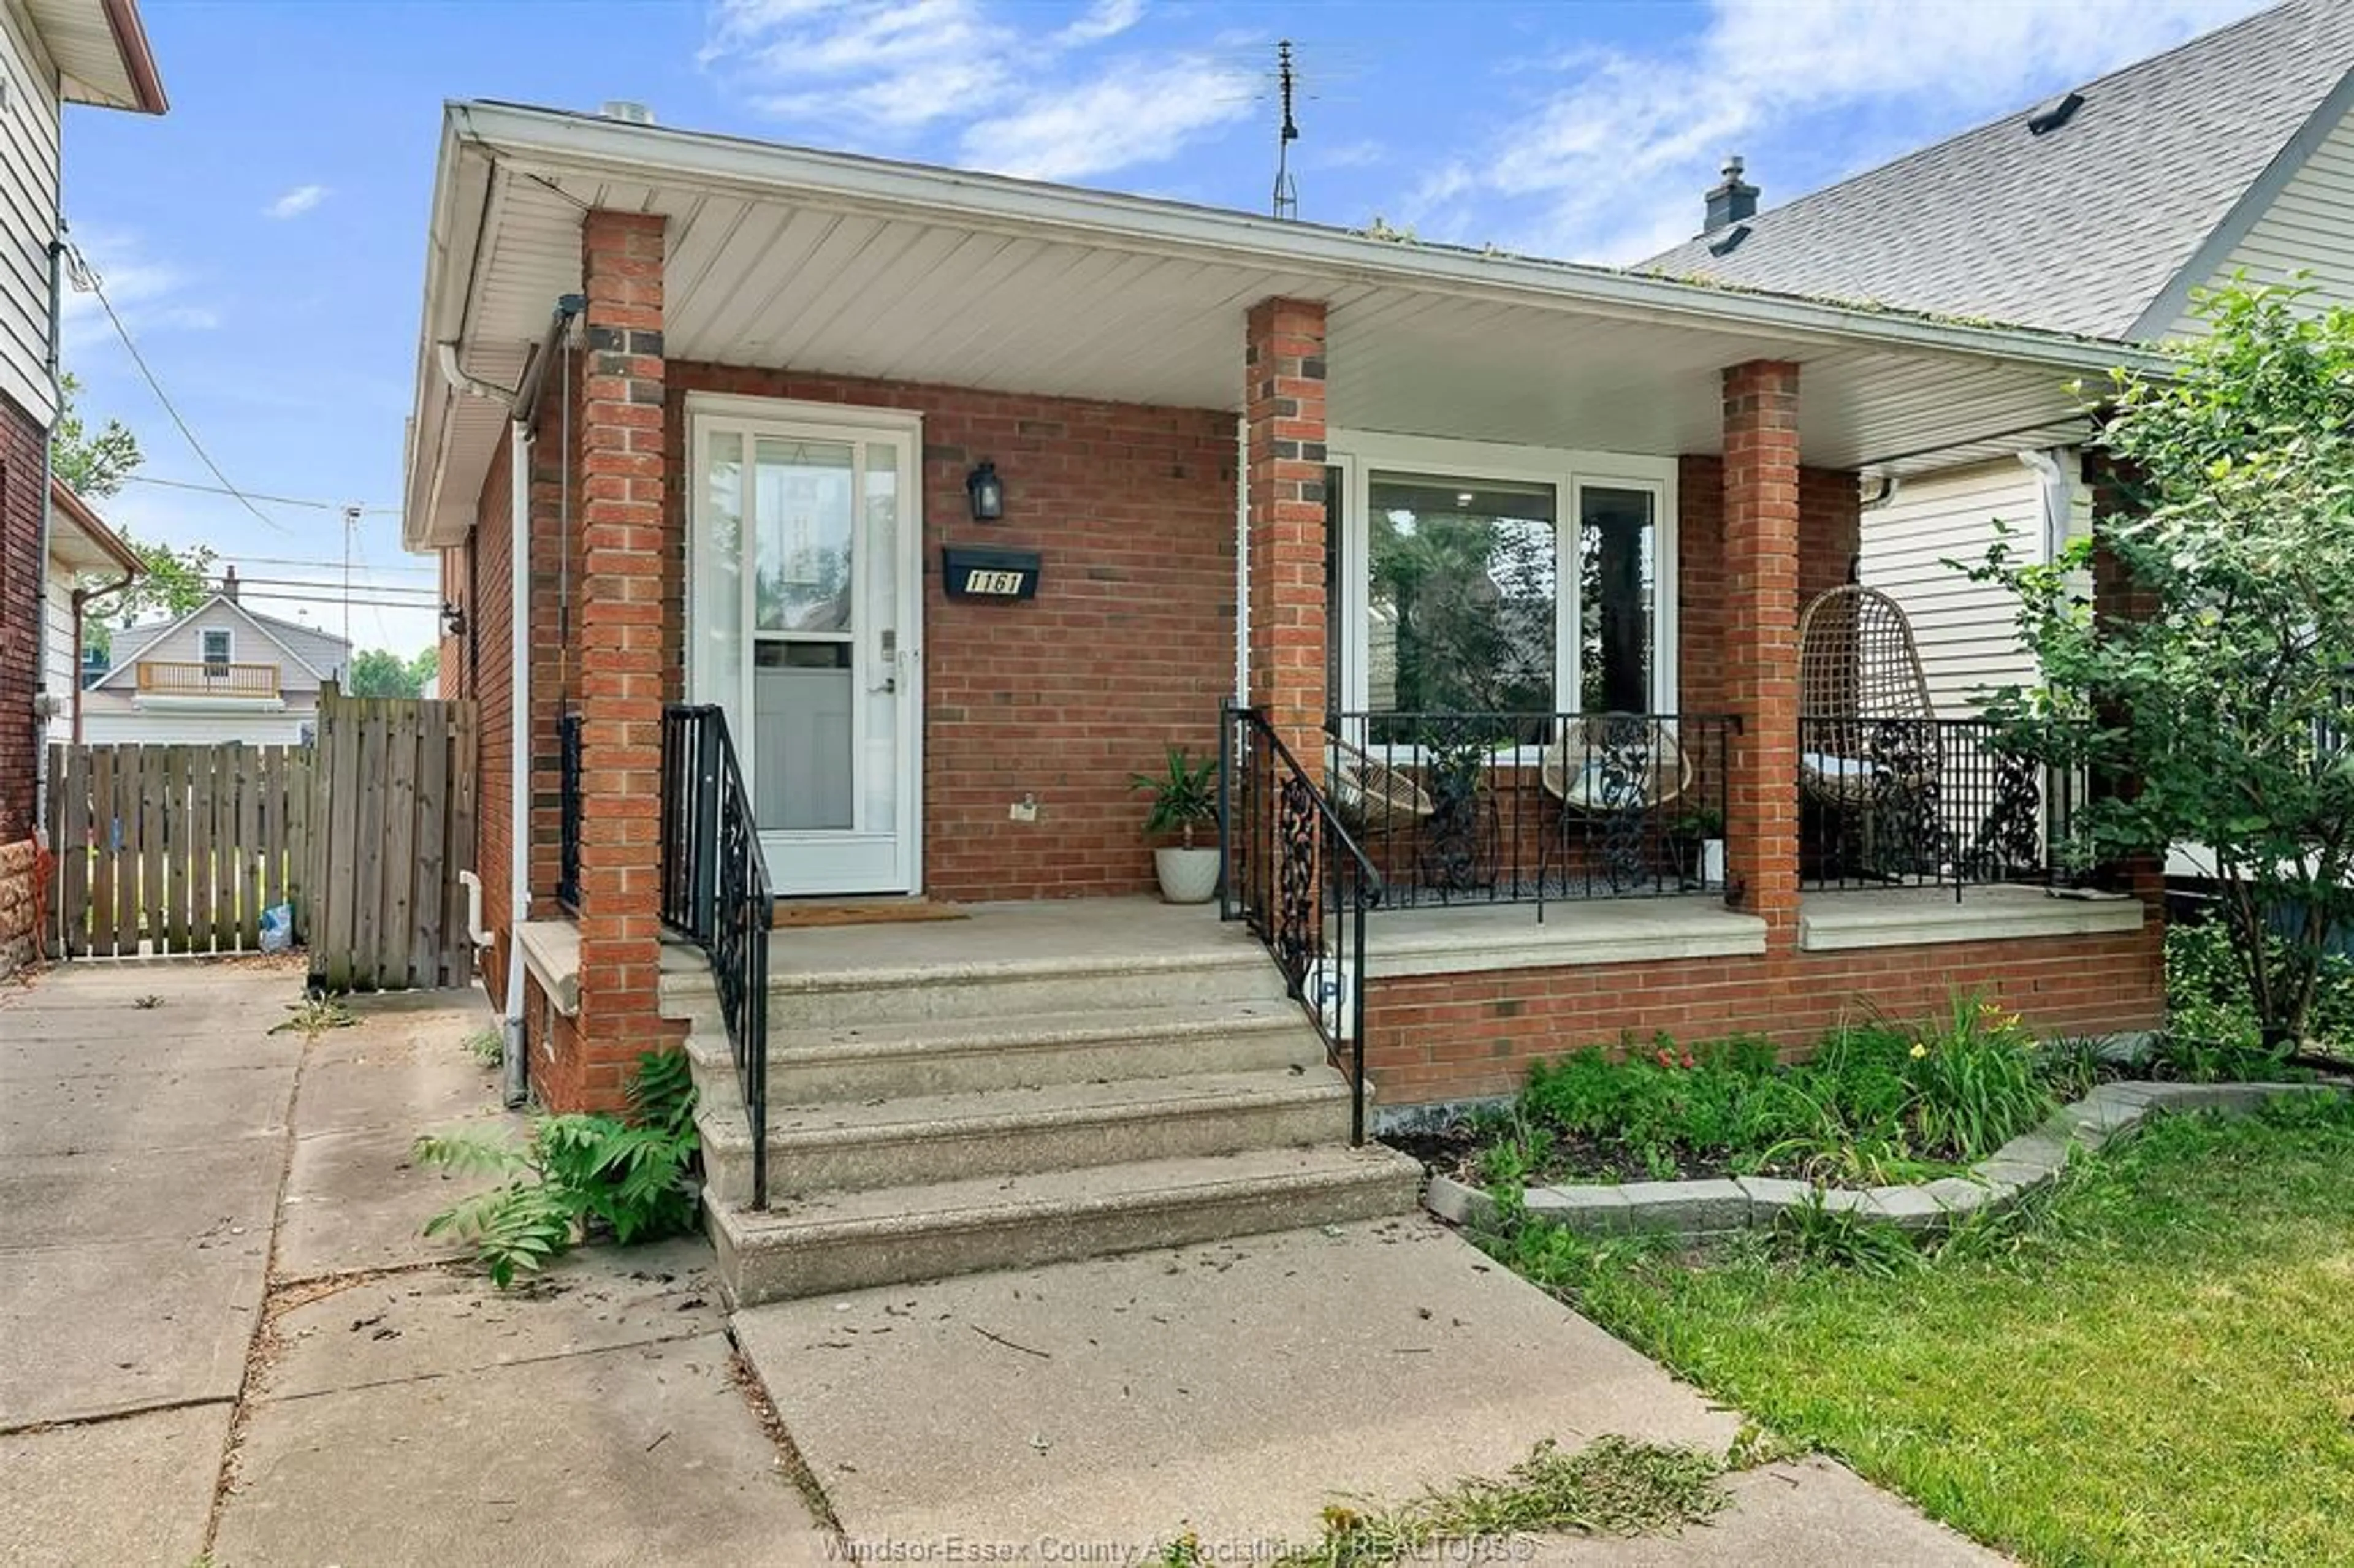 Home with brick exterior material for 1161 GLADSTONE, Windsor Ontario N9A 2R9